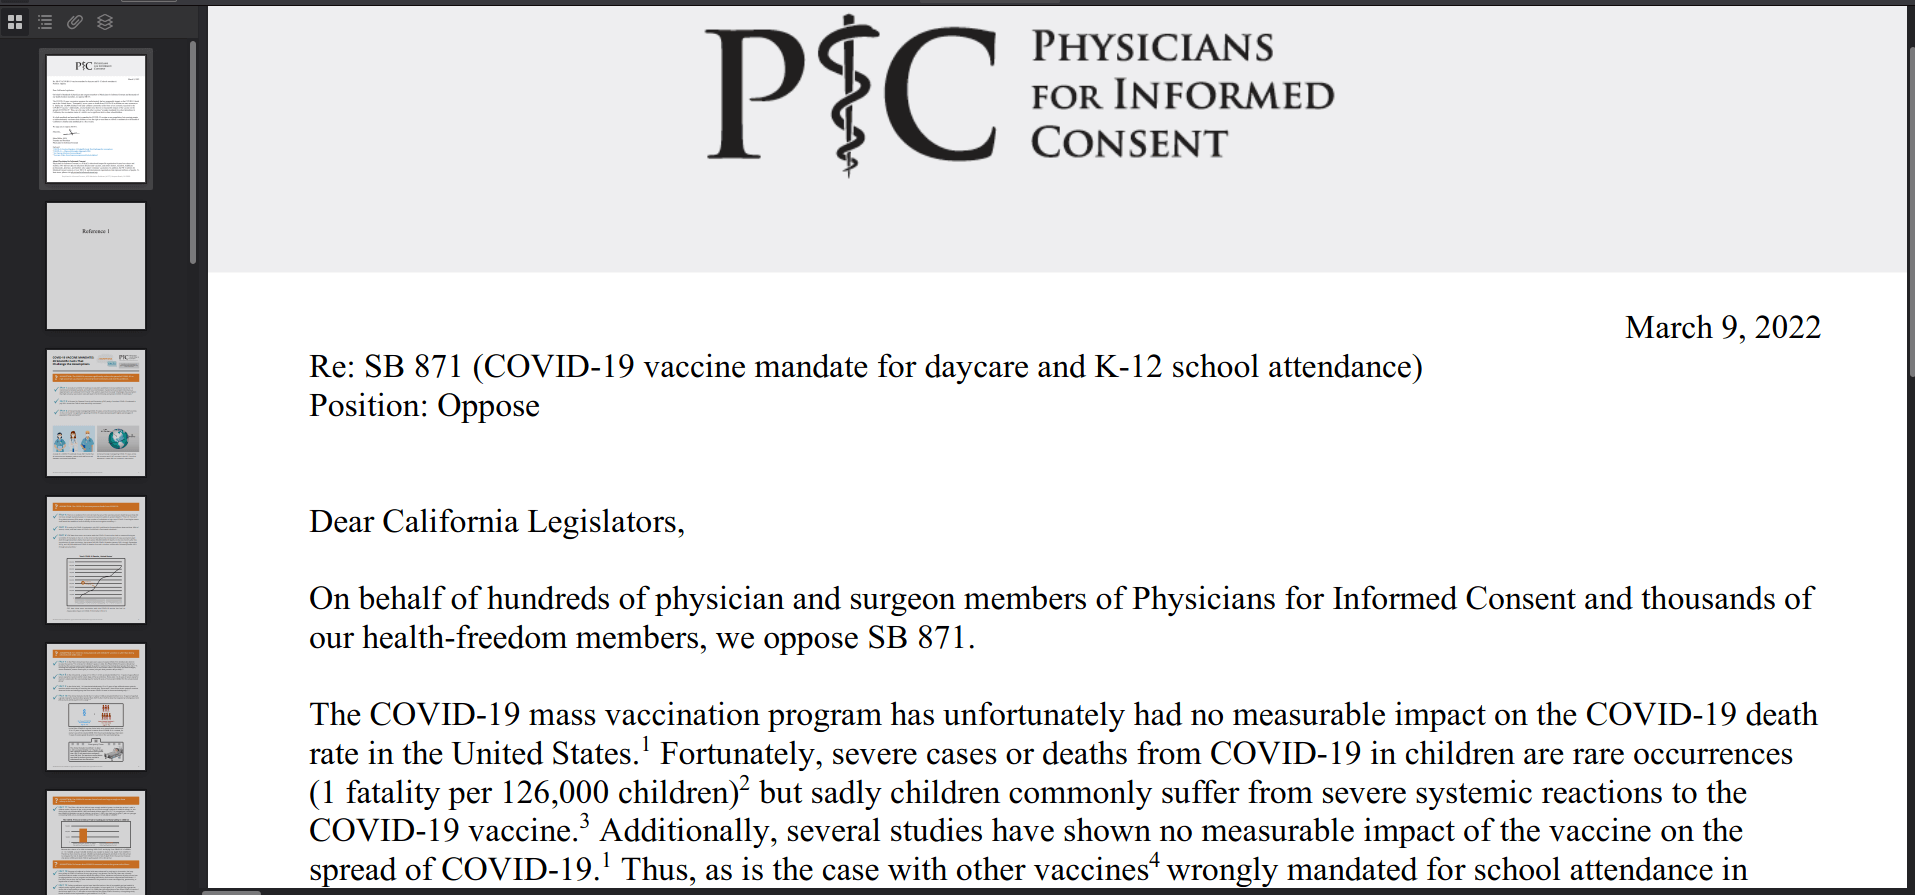 Informed Consent Matters - Oppose SB871